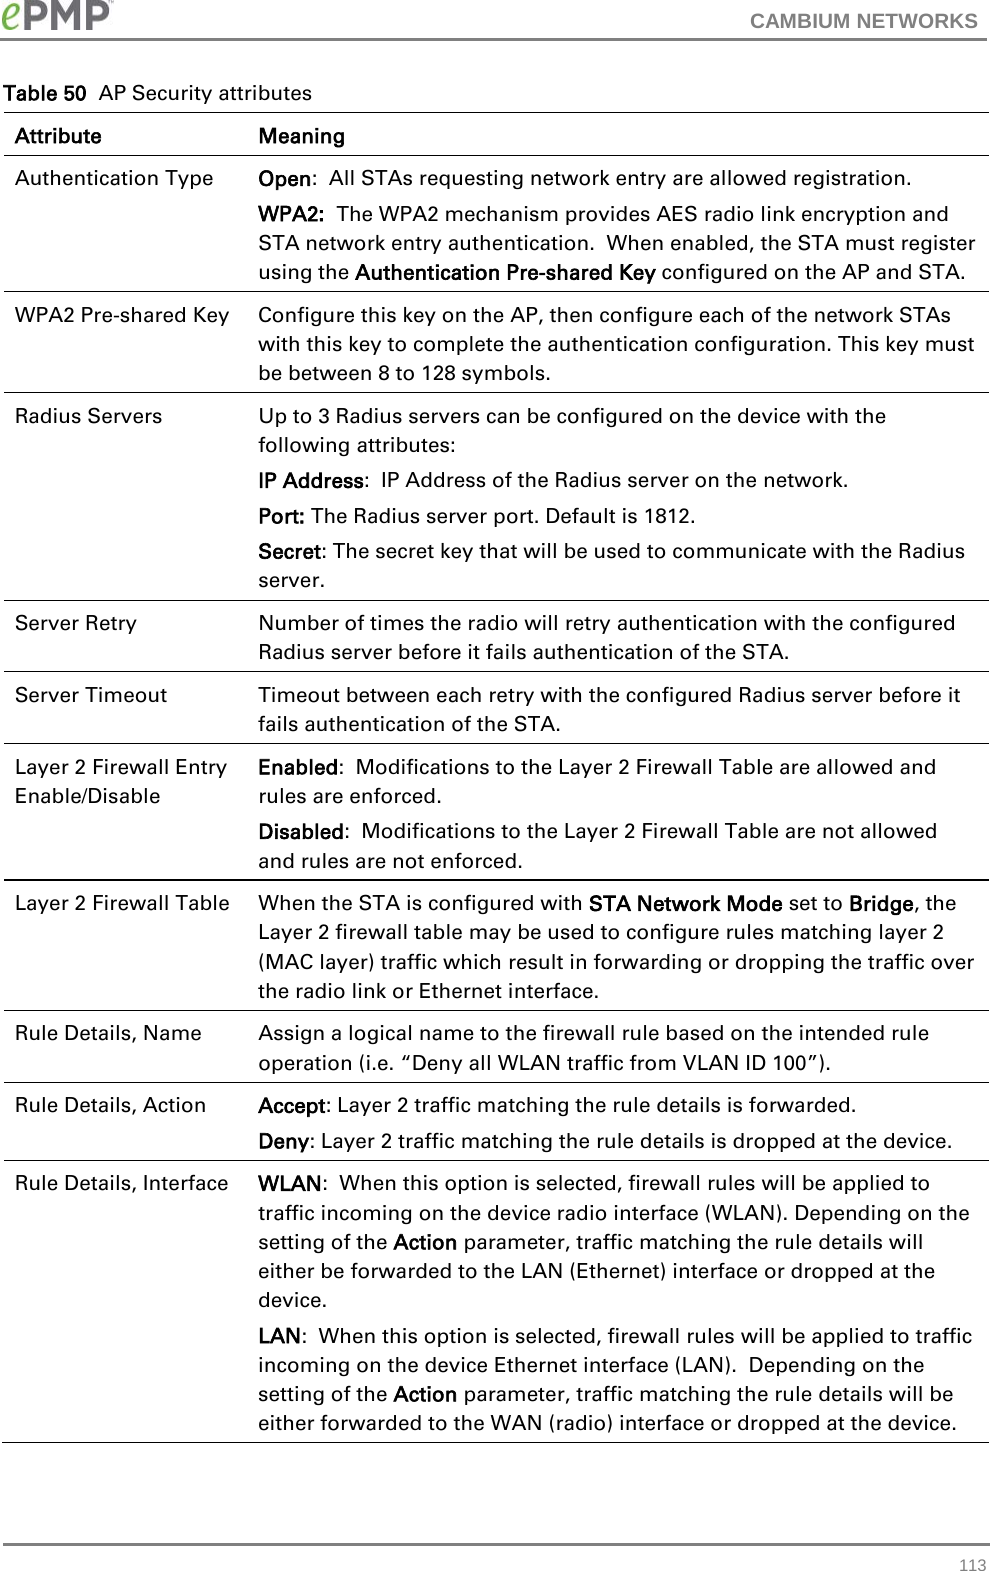 CAMBIUM NETWORKS  Table 50  AP Security attributes Attribute Meaning Authentication Type Open:  All STAs requesting network entry are allowed registration. WPA2:  The WPA2 mechanism provides AES radio link encryption and STA network entry authentication.  When enabled, the STA must register using the Authentication Pre-shared Key configured on the AP and STA.  WPA2 Pre-shared Key Configure this key on the AP, then configure each of the network STAs with this key to complete the authentication configuration. This key must be between 8 to 128 symbols. Radius Servers Up to 3 Radius servers can be configured on the device with the following attributes: IP Address:  IP Address of the Radius server on the network.  Port: The Radius server port. Default is 1812. Secret: The secret key that will be used to communicate with the Radius server. Server Retry Number of times the radio will retry authentication with the configured Radius server before it fails authentication of the STA. Server Timeout Timeout between each retry with the configured Radius server before it fails authentication of the STA. Layer 2 Firewall Entry Enable/Disable Enabled:  Modifications to the Layer 2 Firewall Table are allowed and rules are enforced. Disabled:  Modifications to the Layer 2 Firewall Table are not allowed and rules are not enforced. Layer 2 Firewall Table When the STA is configured with STA Network Mode set to Bridge, the Layer 2 firewall table may be used to configure rules matching layer 2 (MAC layer) traffic which result in forwarding or dropping the traffic over the radio link or Ethernet interface. Rule Details, Name Assign a logical name to the firewall rule based on the intended rule operation (i.e. “Deny all WLAN traffic from VLAN ID 100”). Rule Details, Action Accept: Layer 2 traffic matching the rule details is forwarded. Deny: Layer 2 traffic matching the rule details is dropped at the device. Rule Details, Interface WLAN:  When this option is selected, firewall rules will be applied to traffic incoming on the device radio interface (WLAN). Depending on the setting of the Action parameter, traffic matching the rule details will either be forwarded to the LAN (Ethernet) interface or dropped at the device. LAN:  When this option is selected, firewall rules will be applied to traffic incoming on the device Ethernet interface (LAN).  Depending on the setting of the Action parameter, traffic matching the rule details will be either forwarded to the WAN (radio) interface or dropped at the device.  113 